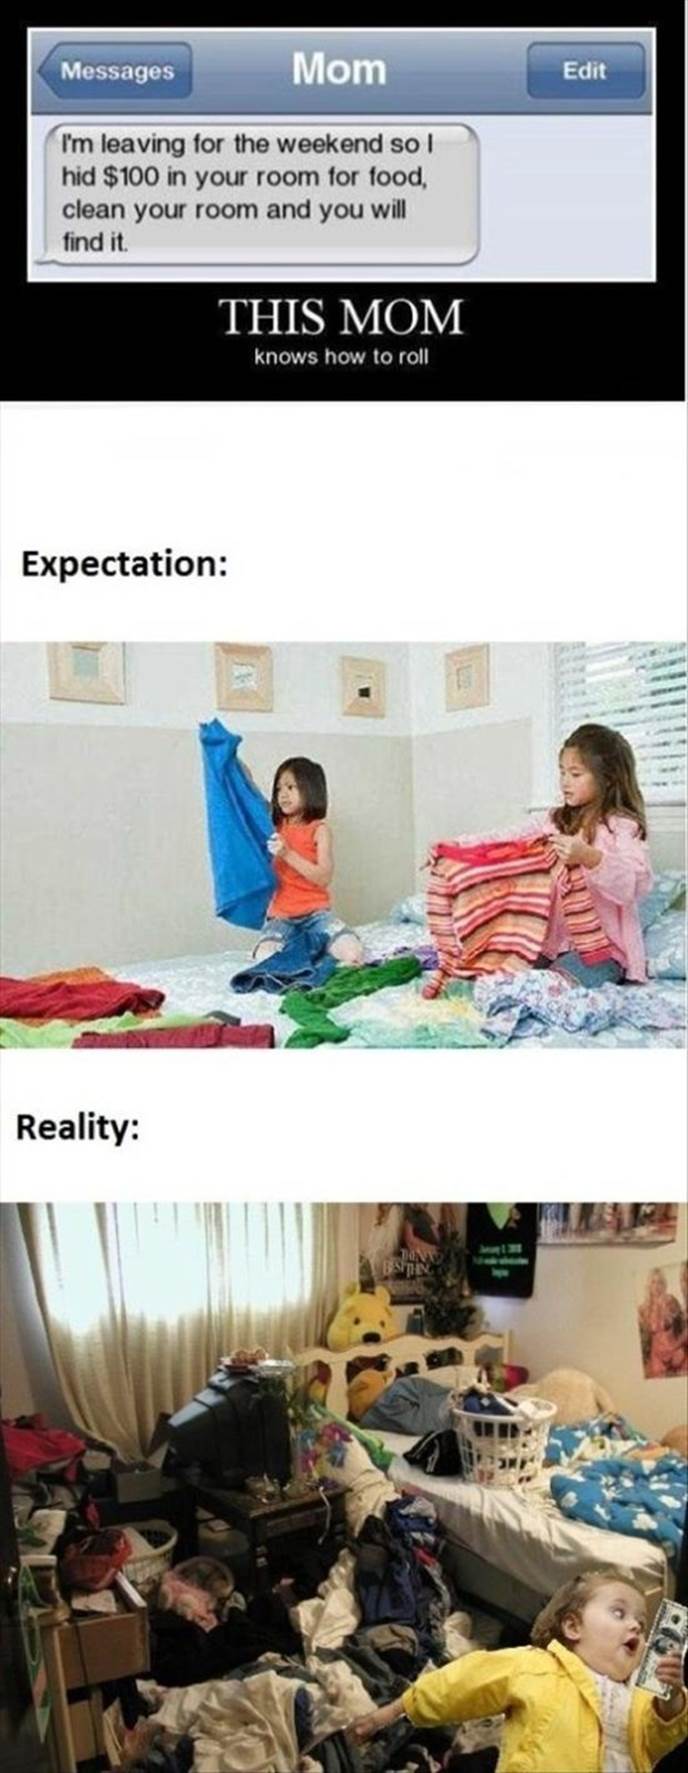 expectations meet reality part4 11 Funny: Expectations meet reality {Part 4}